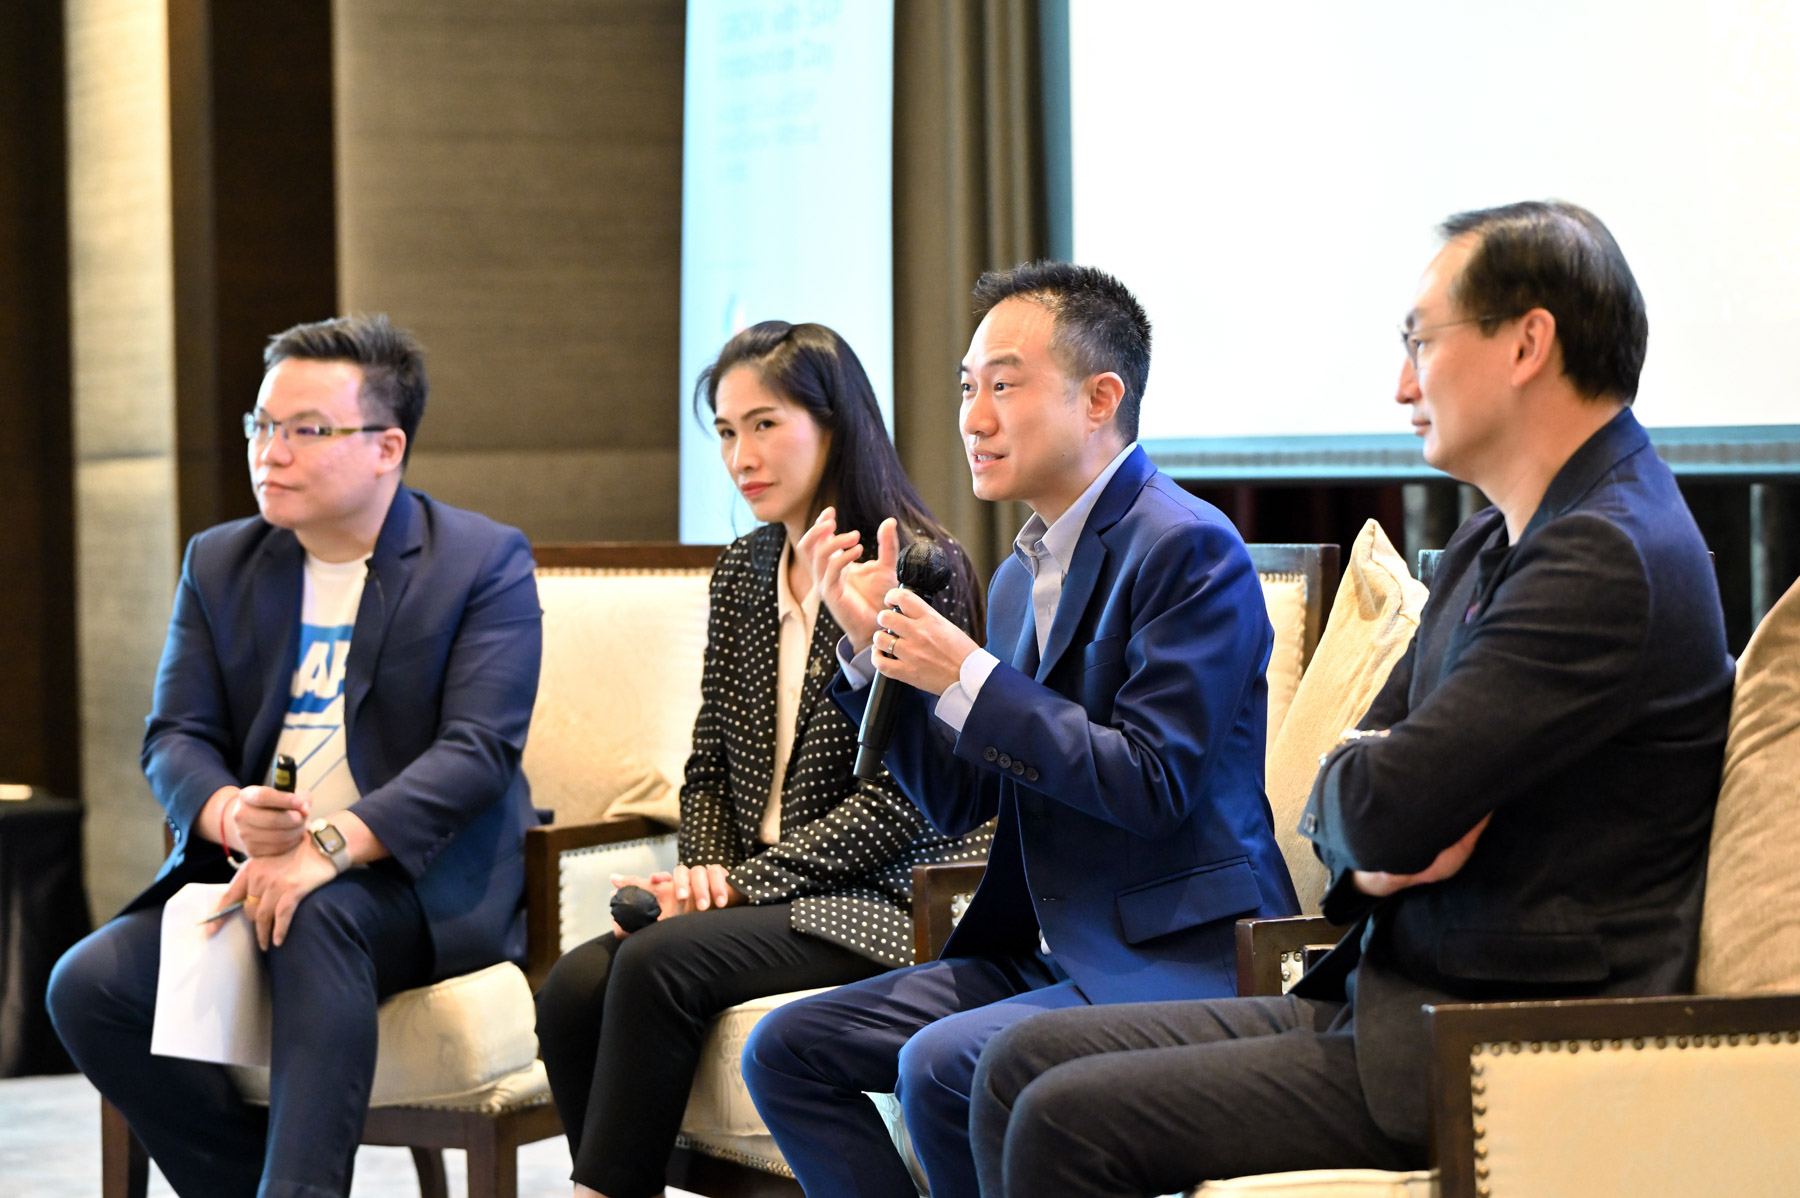 On March 19, 2023, Netizen collaborated with SAP Thailand for the GROW with SAP Innovation Day event, presenting "Adopt Cloud ERP and Grow without Limits." This initiative aims to drive the adoption of Cloud ERP, promoting a new way of working that can rapidly and efficiently transform businesses in the digital era.